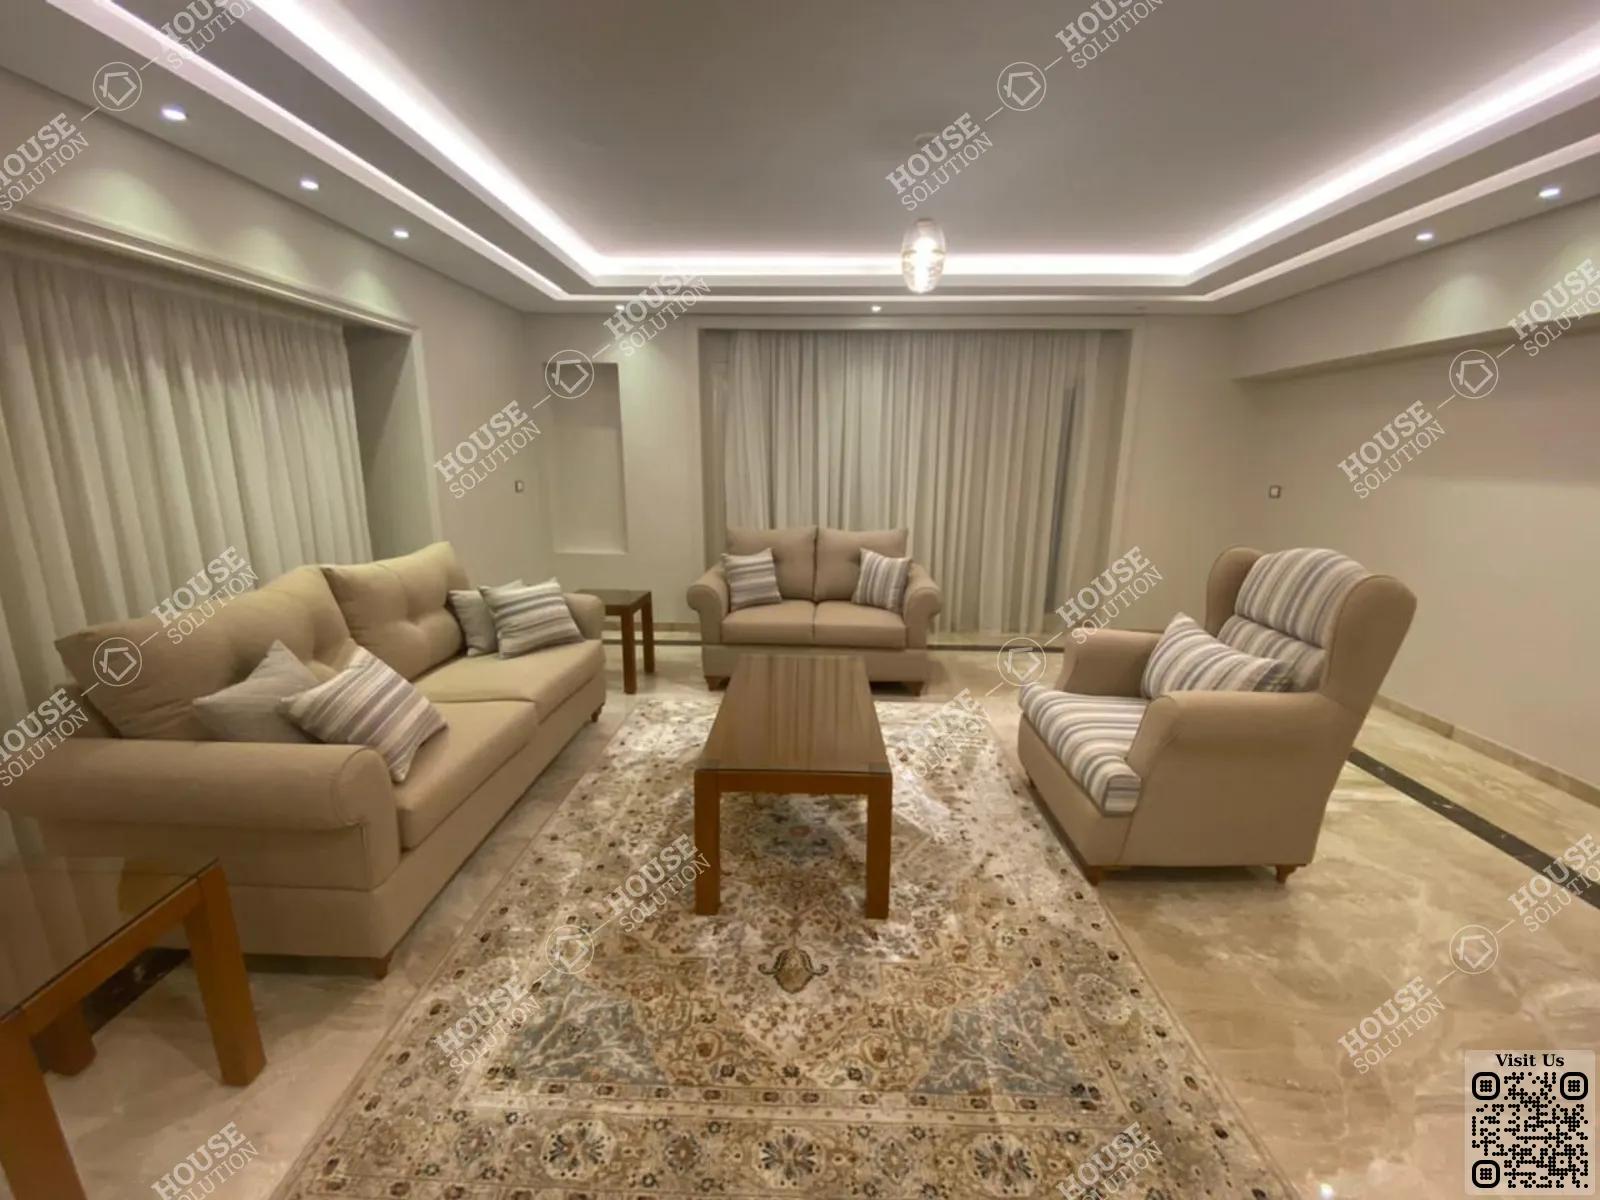 RECEPTION  @ Apartments For Rent In Maadi Maadi Sarayat Area: 240 m² consists of 3 Bedrooms 3 Bathrooms Modern furnished 5 stars #5566-0